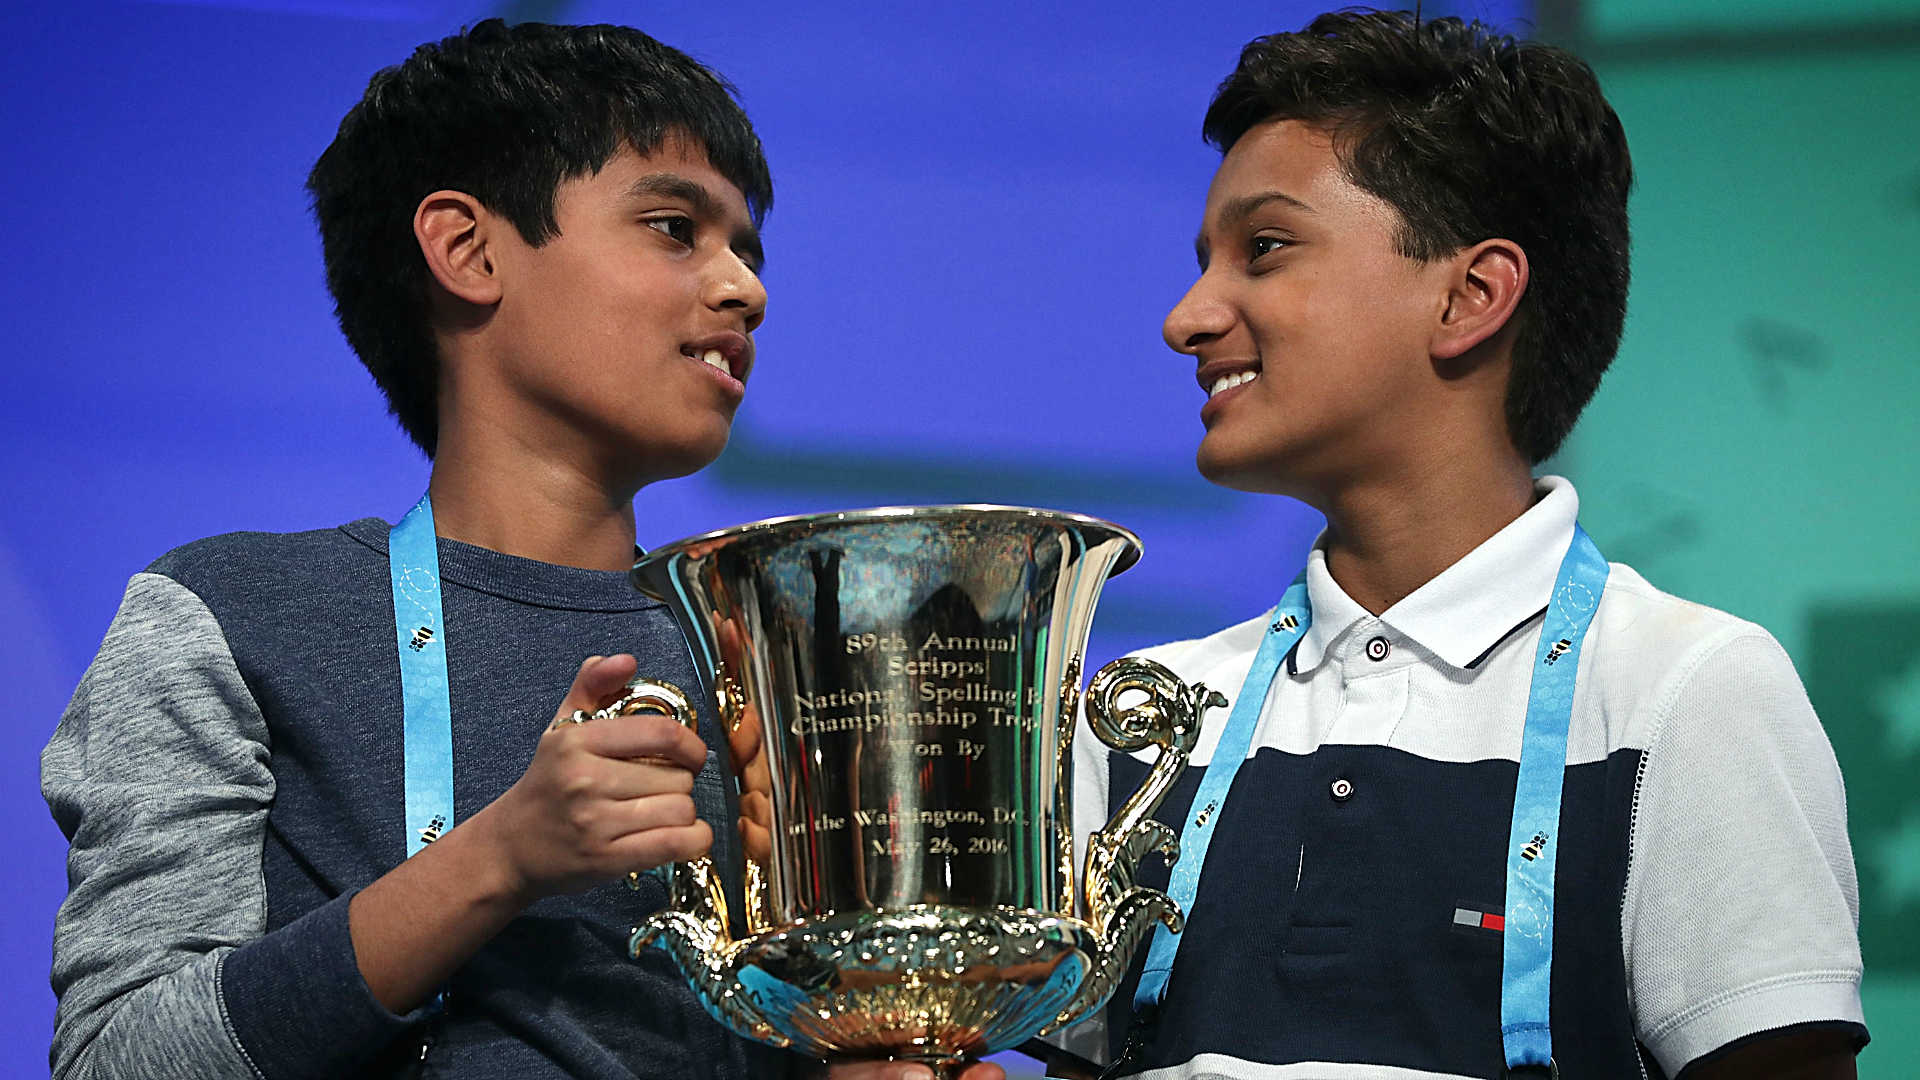 Scripps National Spelling Bee 2017: Date, time, finalists